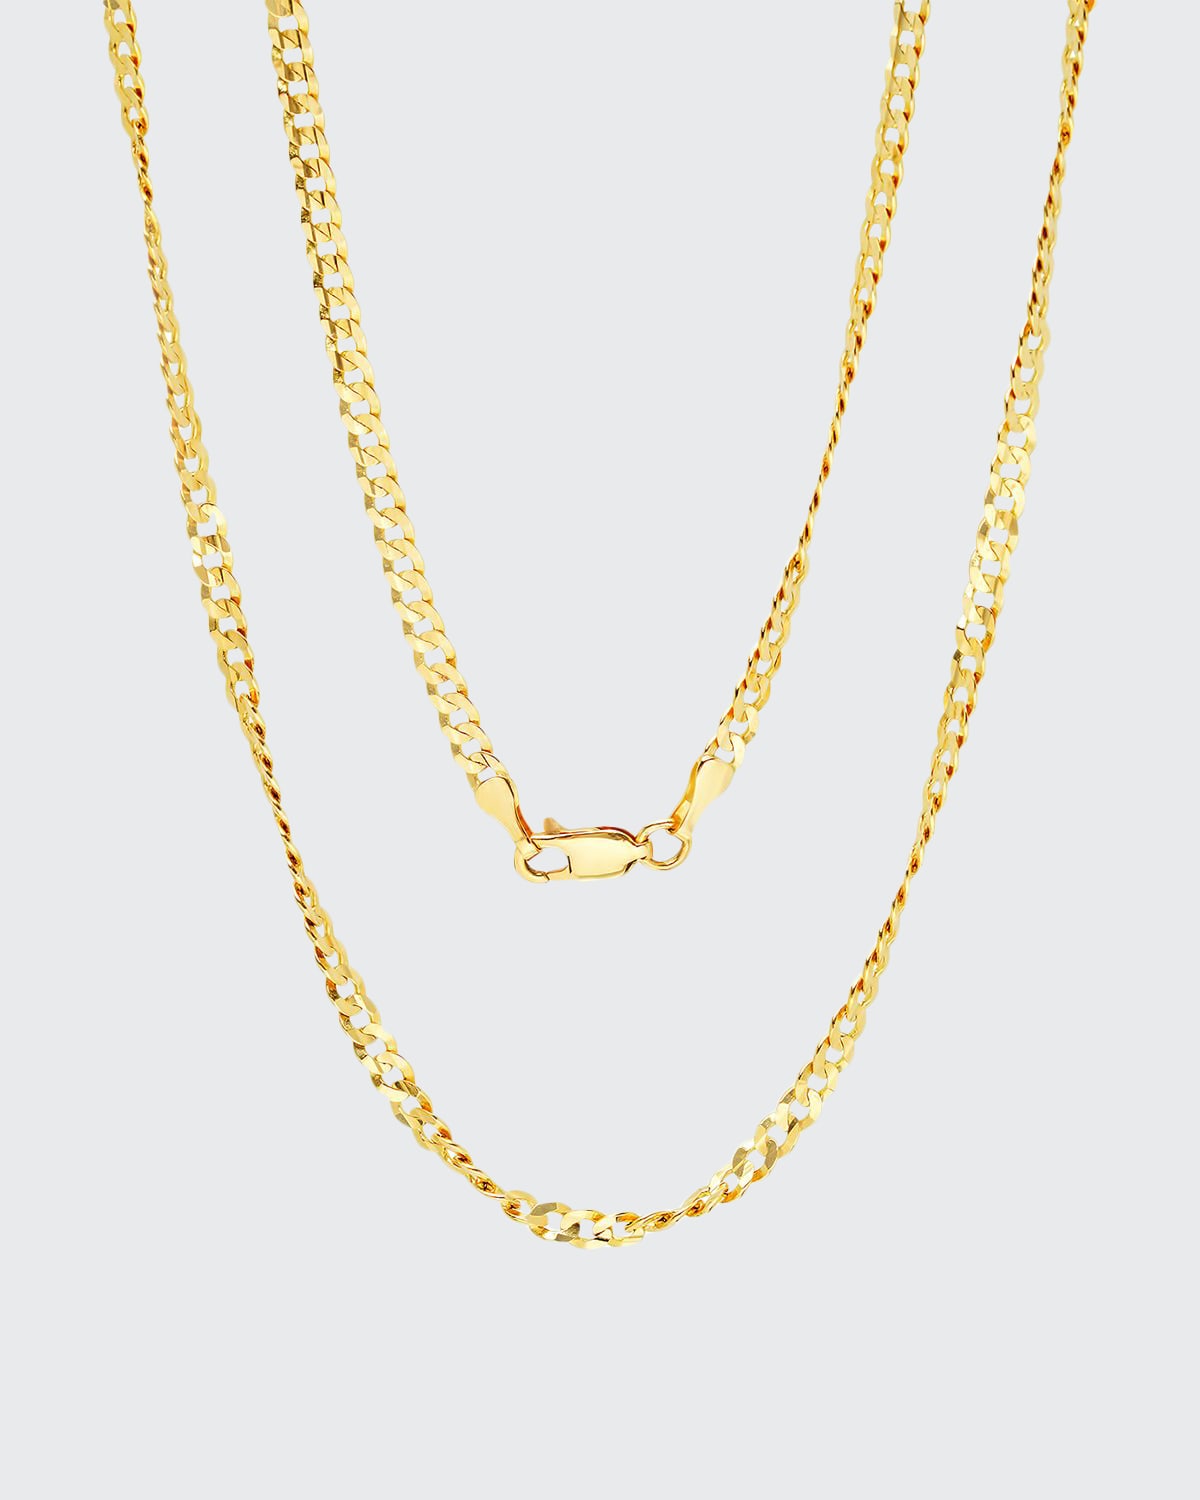 Established Jewelry 14k Yellow Gold Italian Chain Necklace